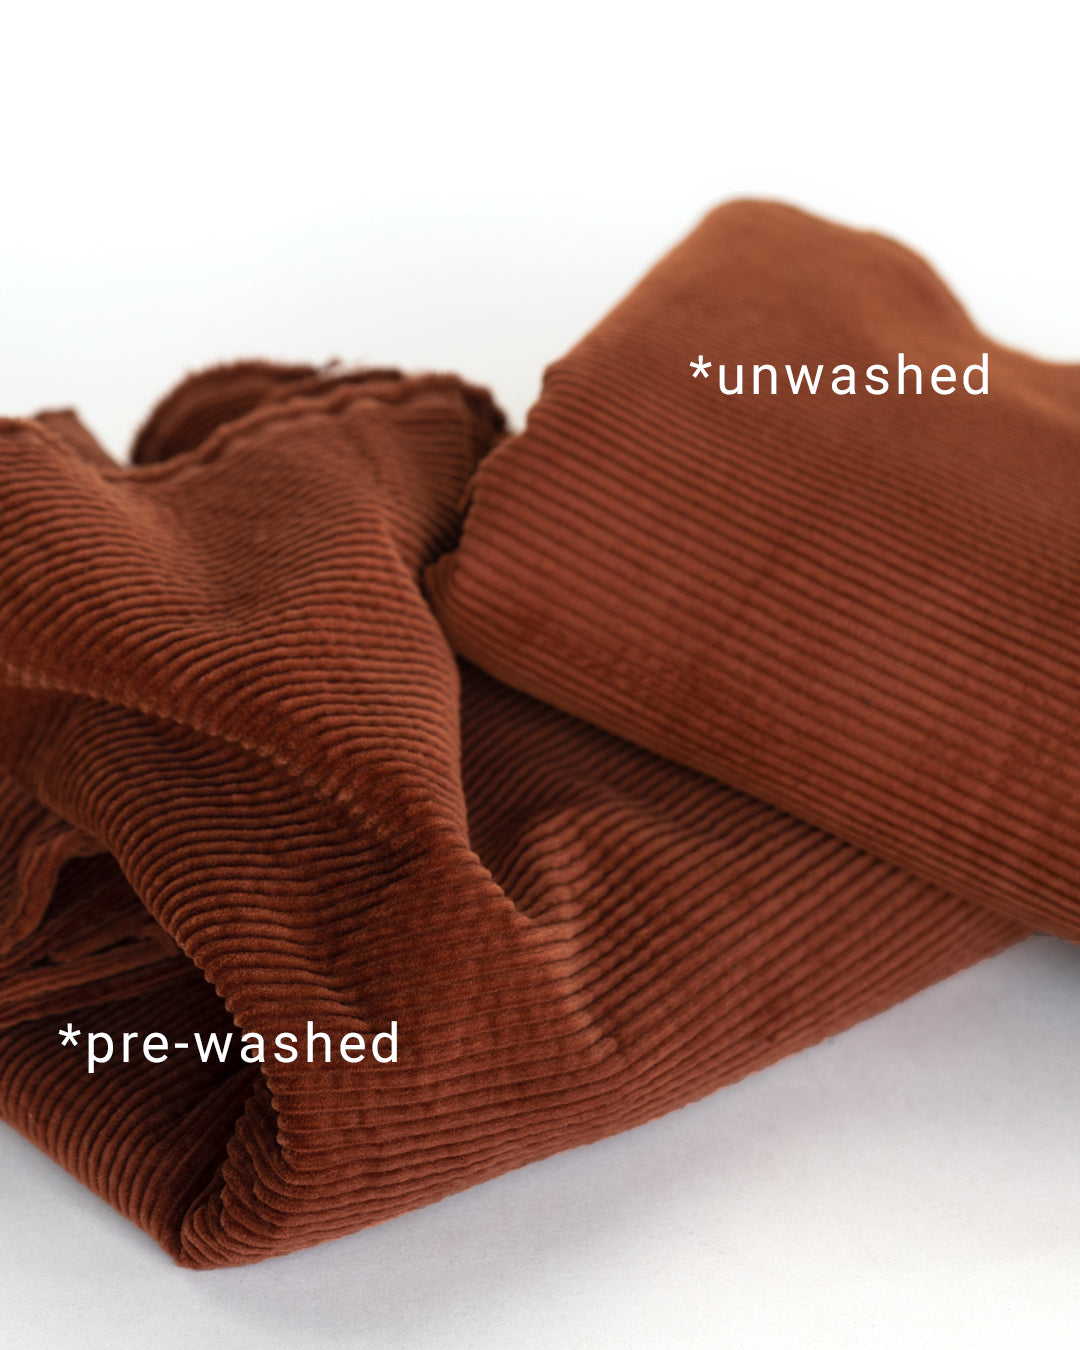 Rumped and unwashed corduroy